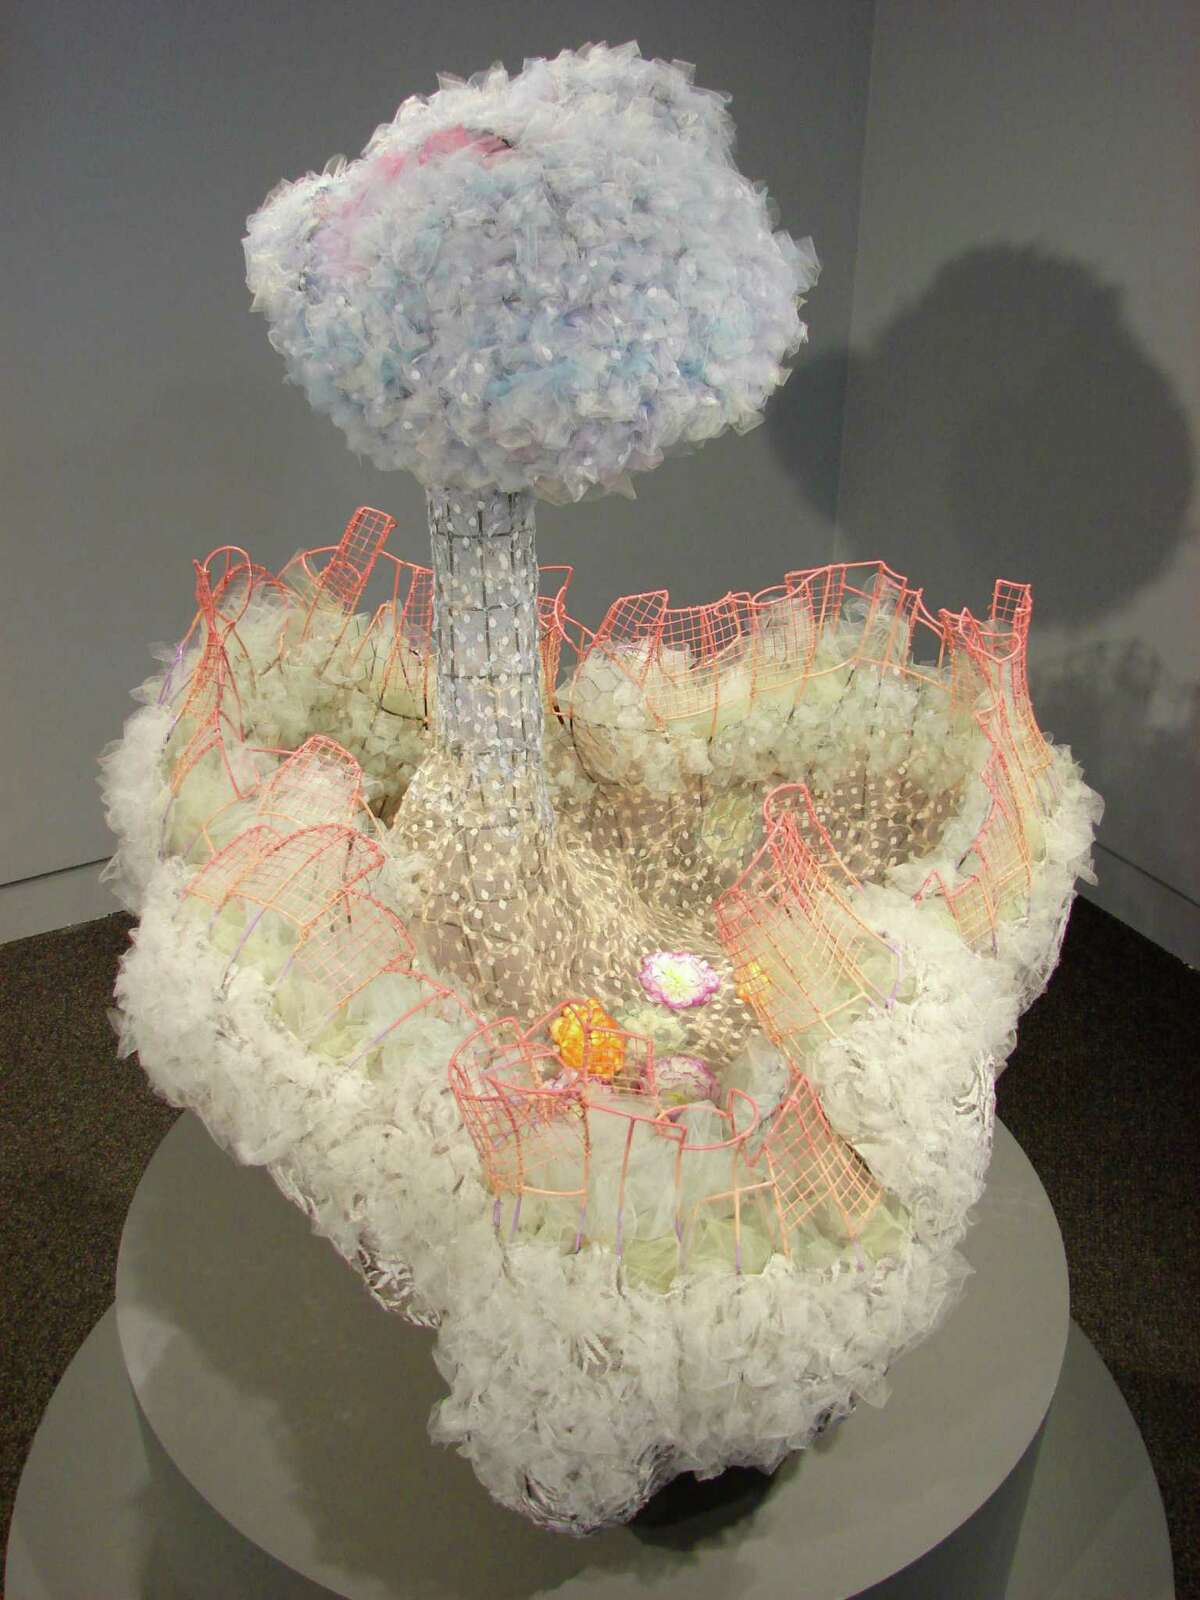 Susan Spencer Crowe, Underneath the Ruffles, Welded steel, chicken wire, hardware cloth, paint, fabric, 2003 (Courtesy Albany Airport Art & Culture Program)